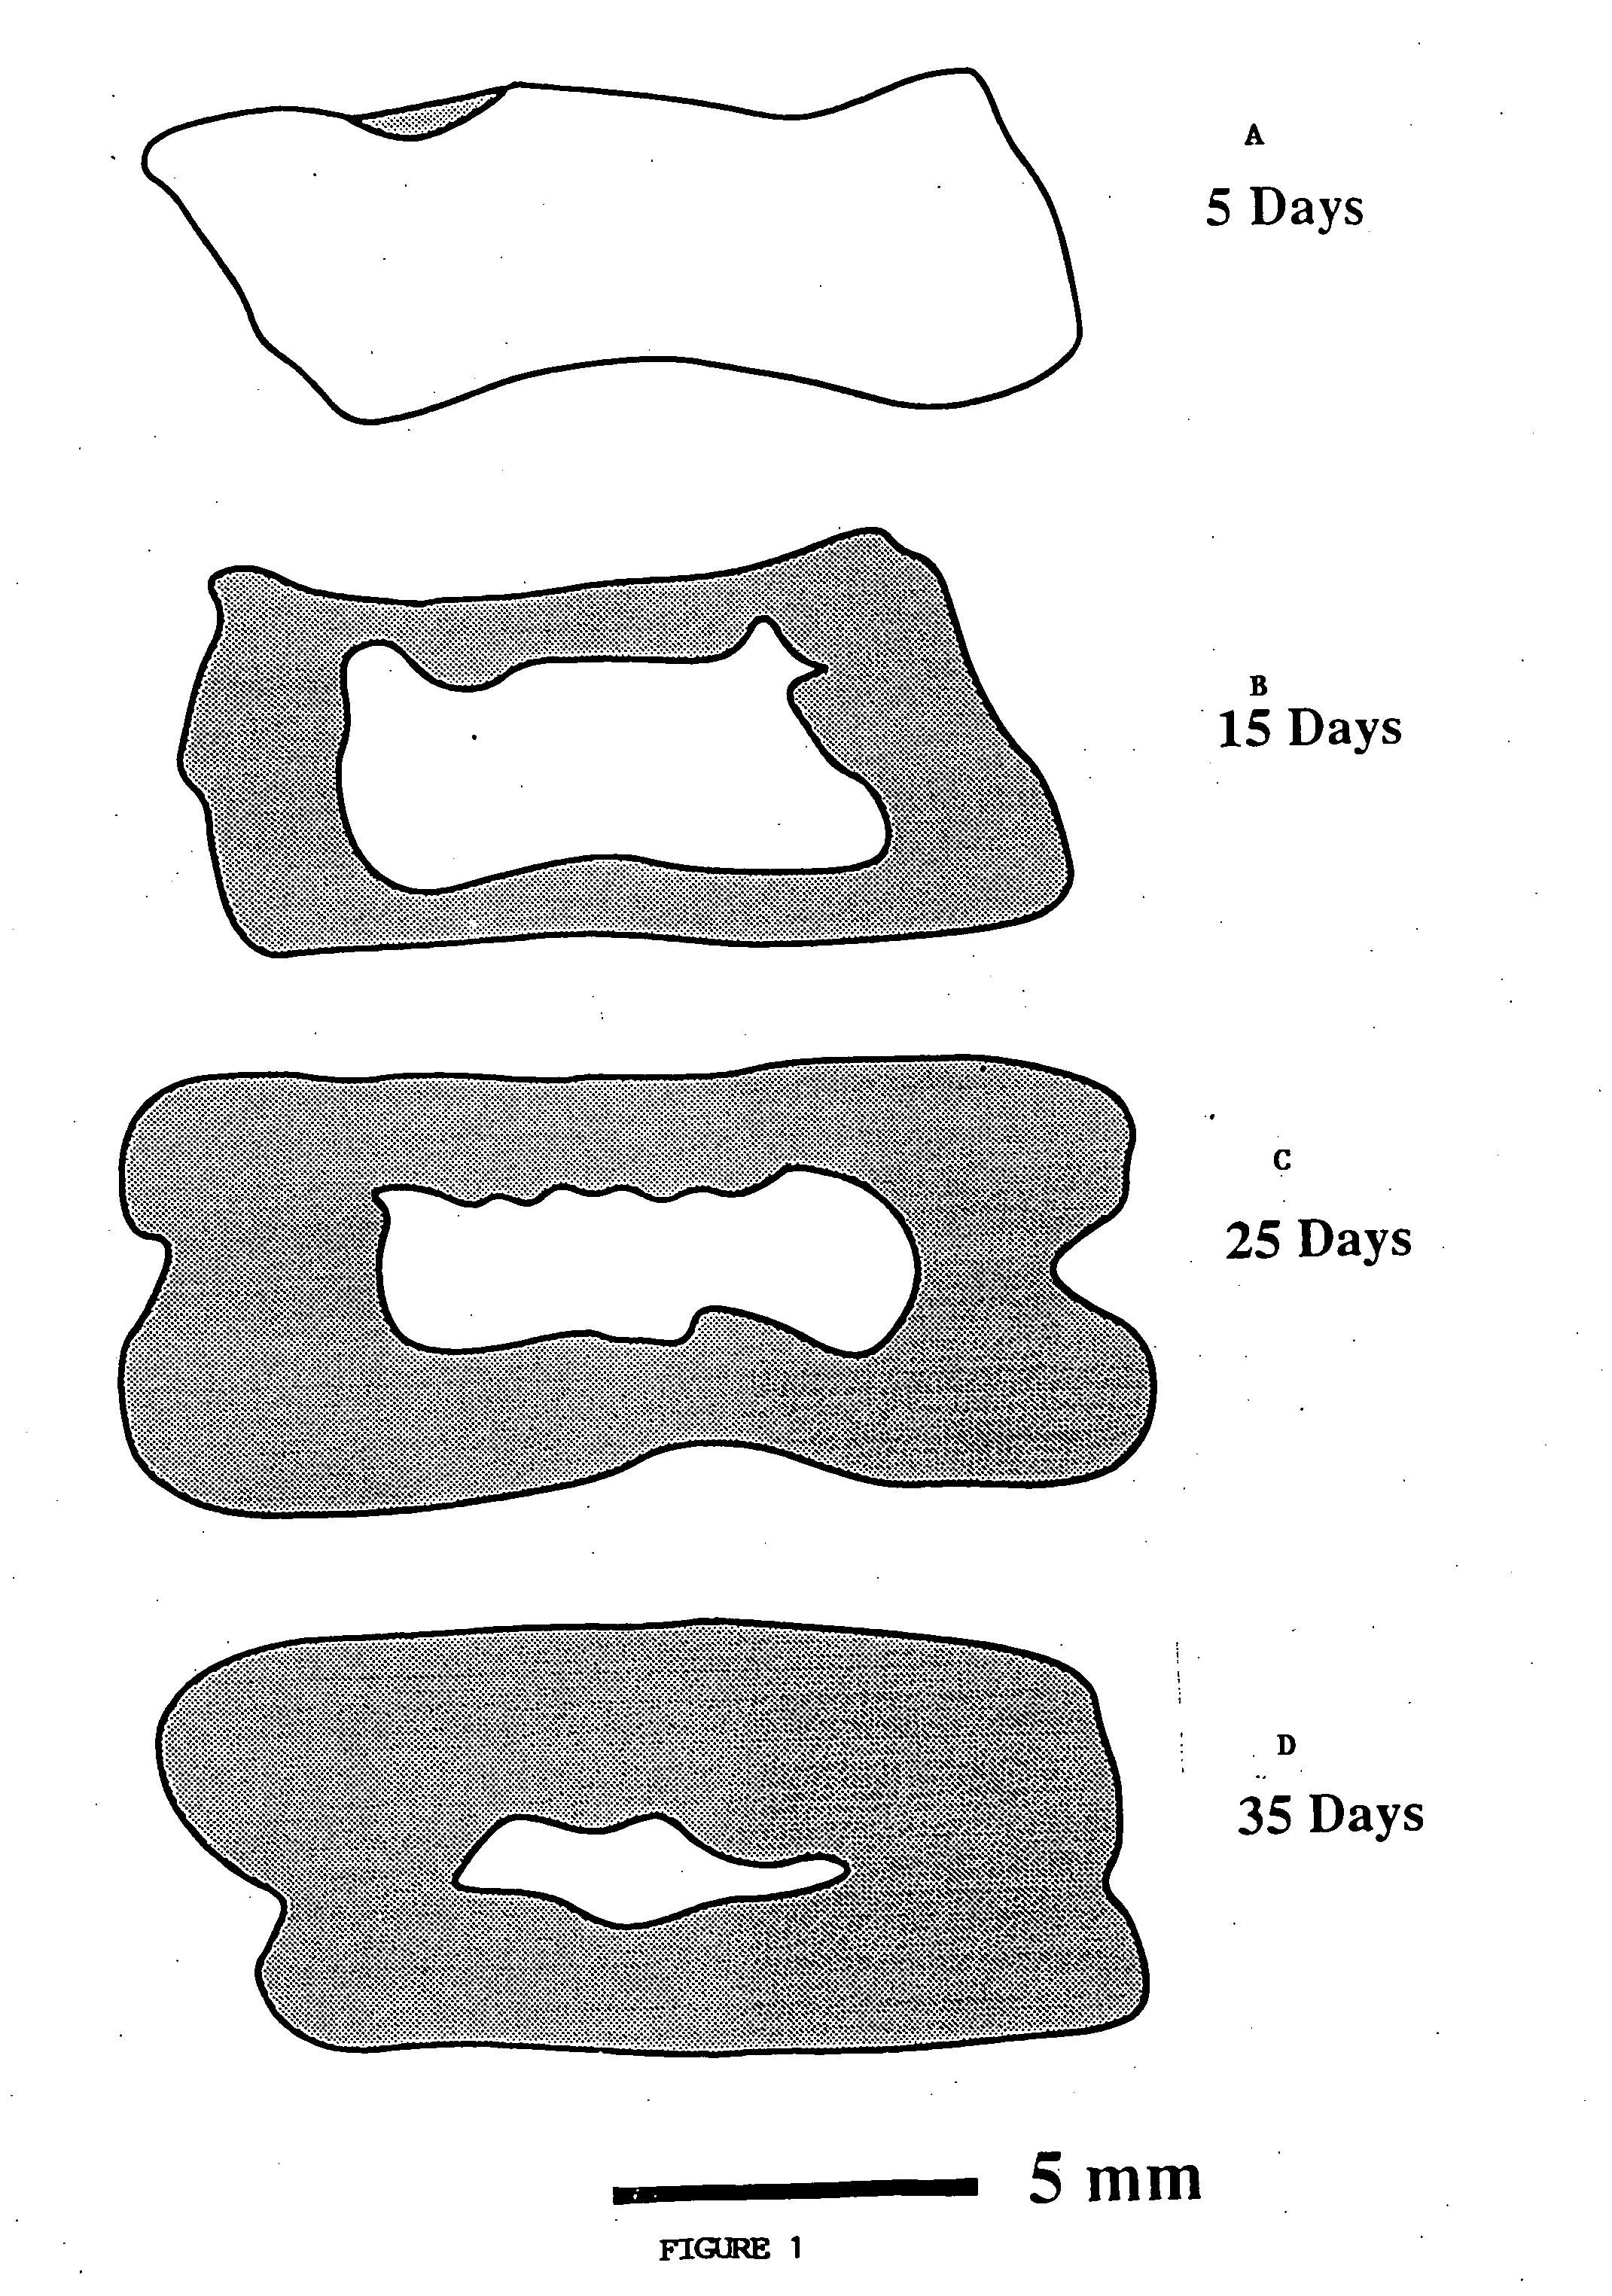 Porous biodegradable polymeric materials for cell transplantation